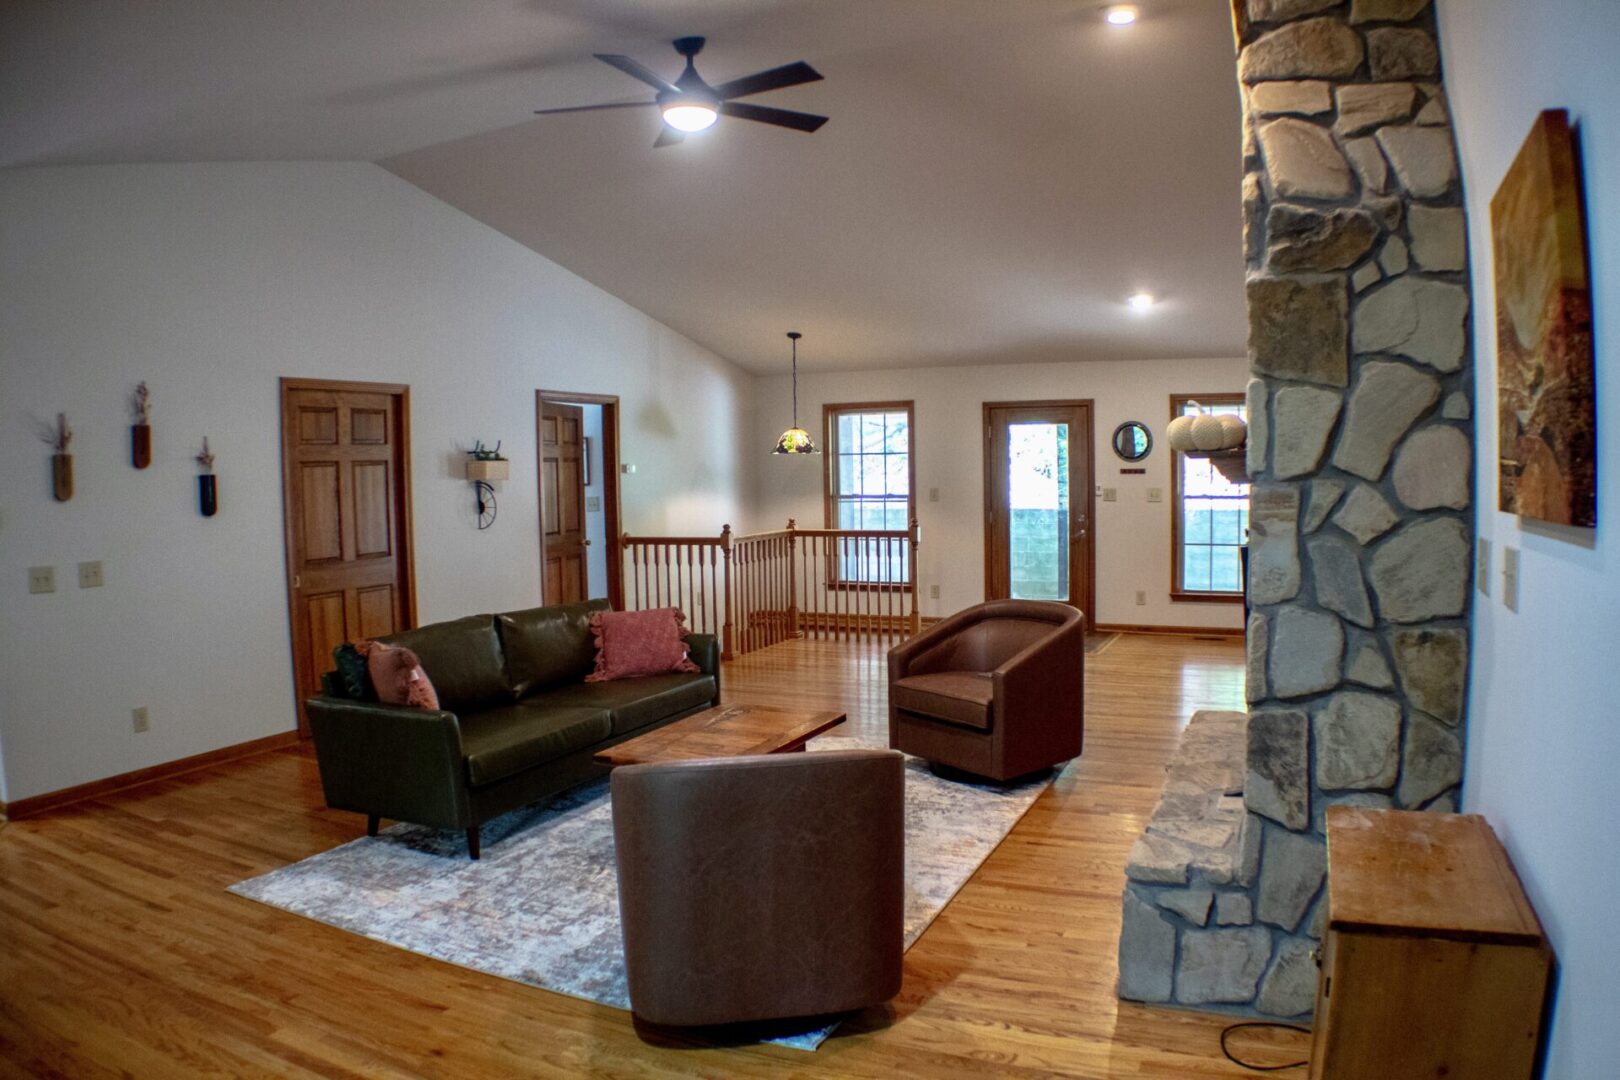 A living room with hard wood floors and stone walls.